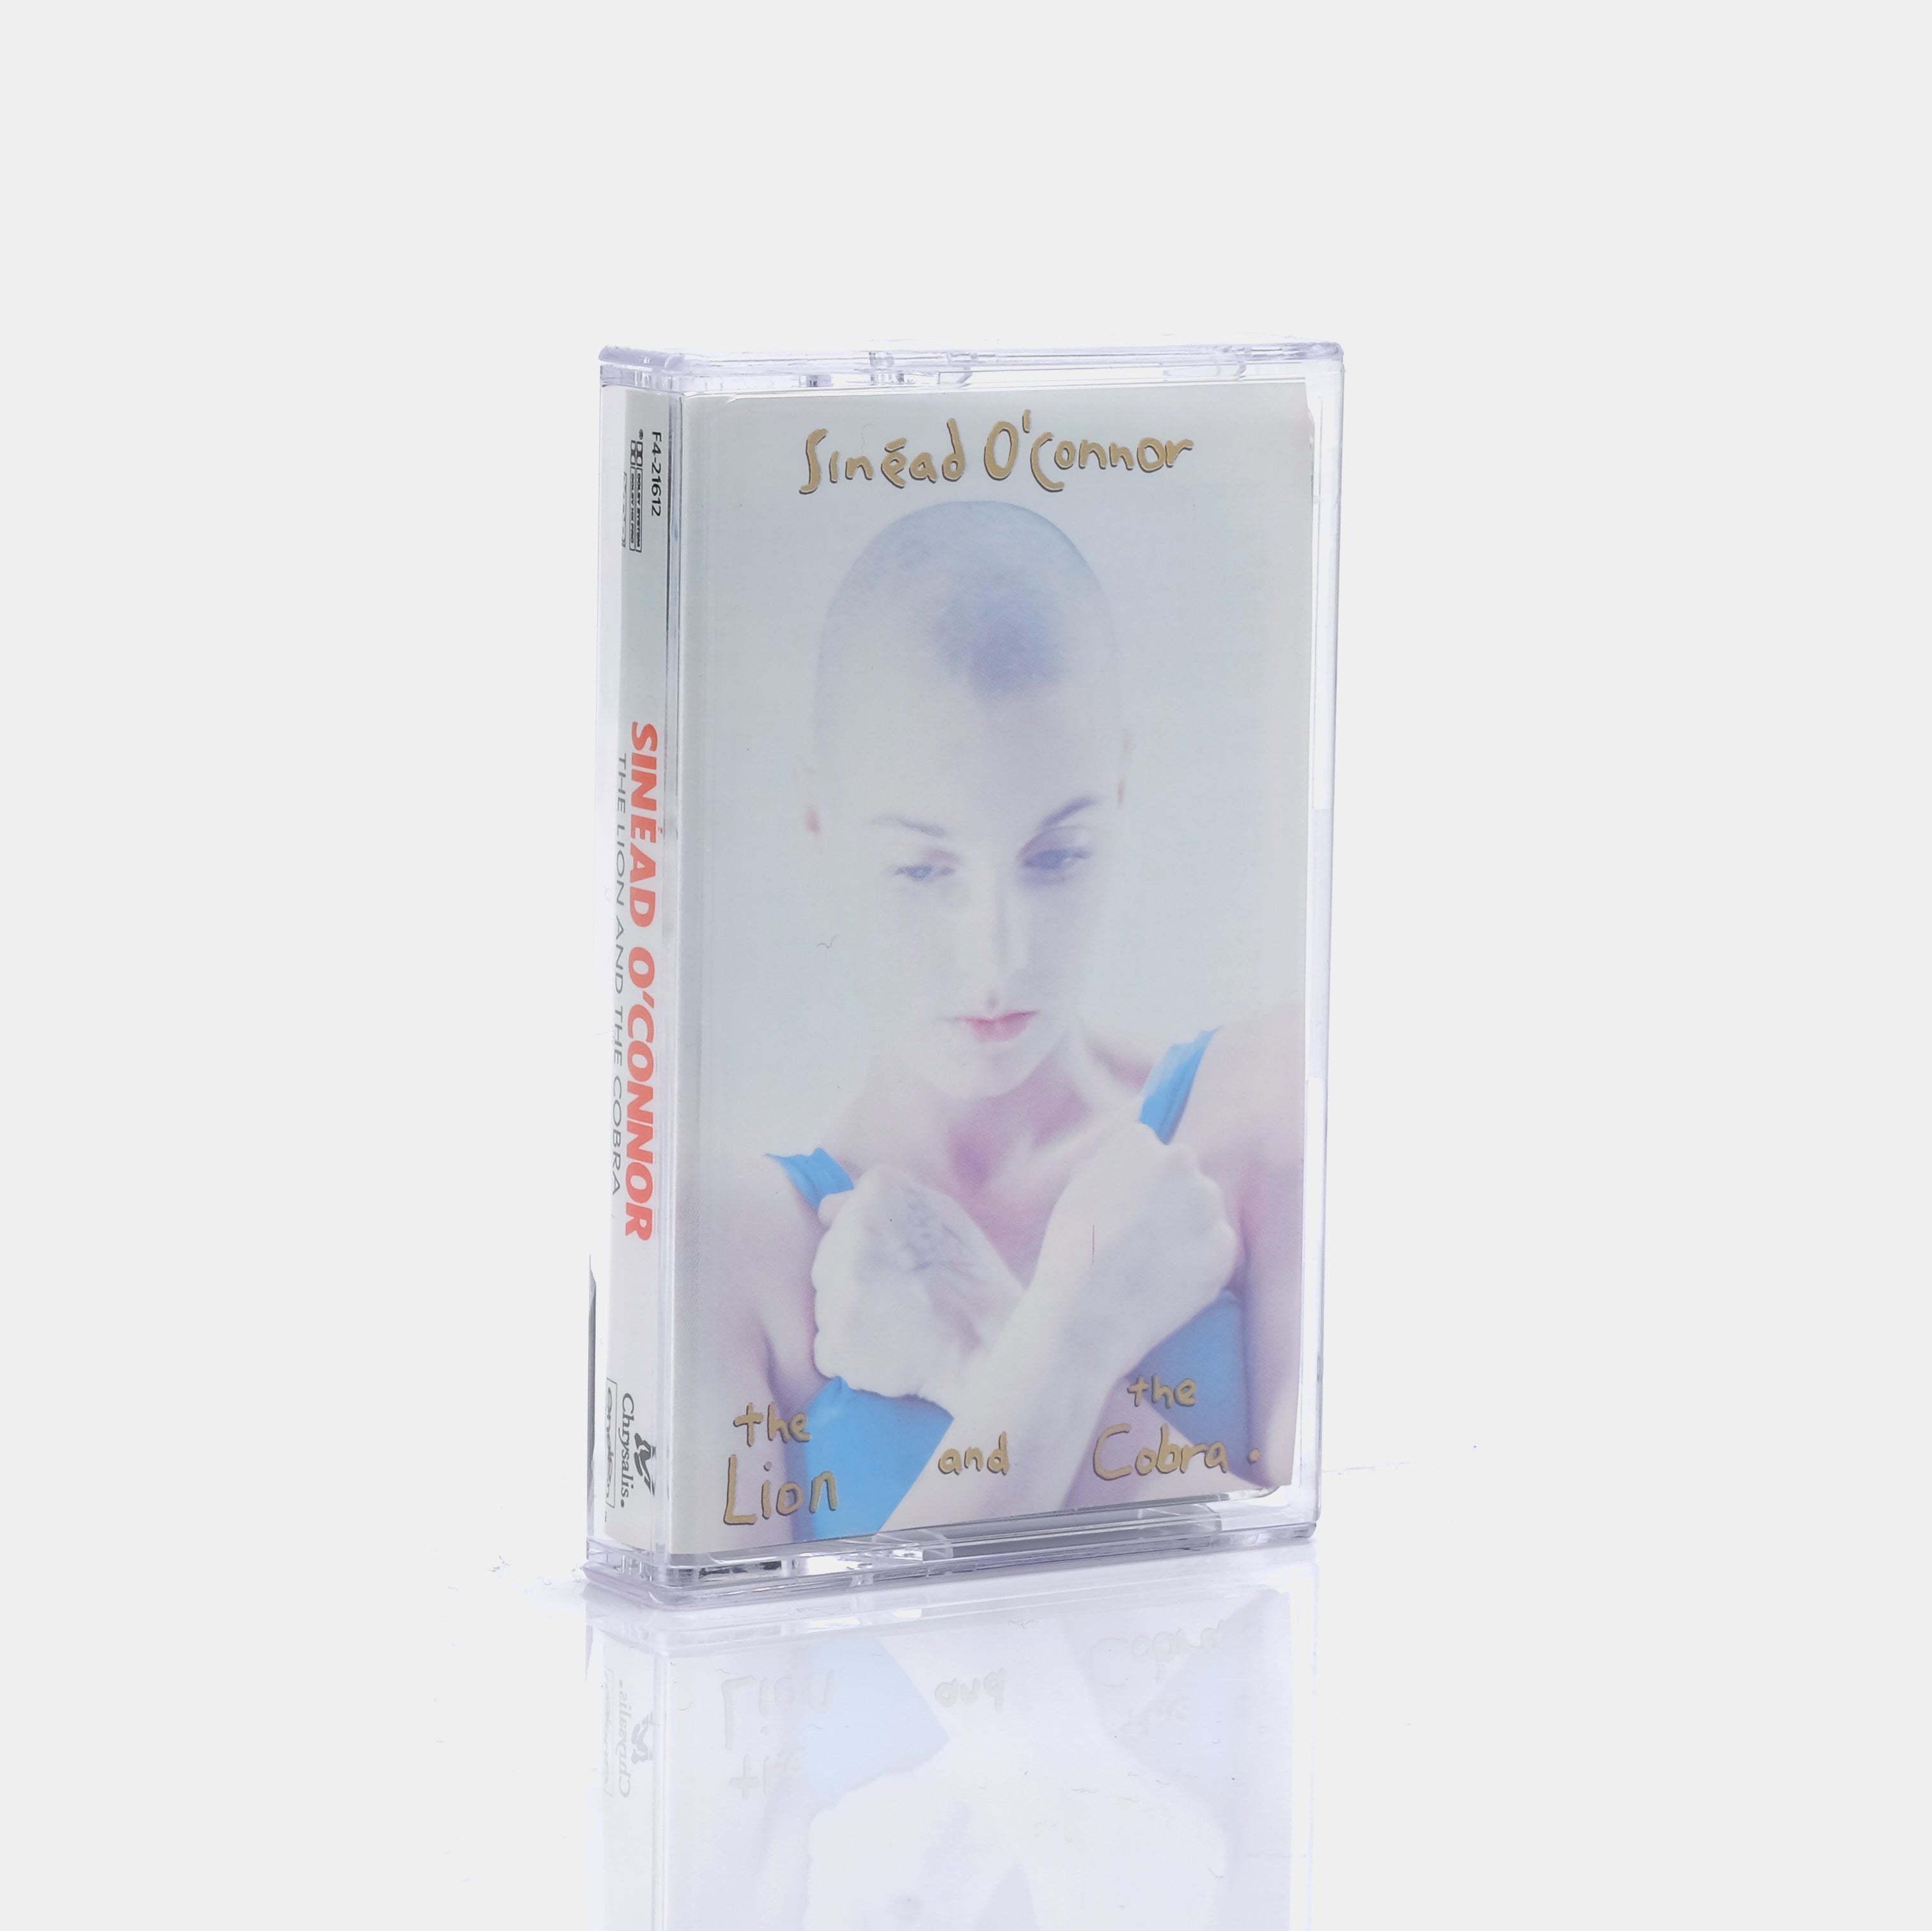 Sinéad O'Connor - The Lion and the Cobra Cassette Tape